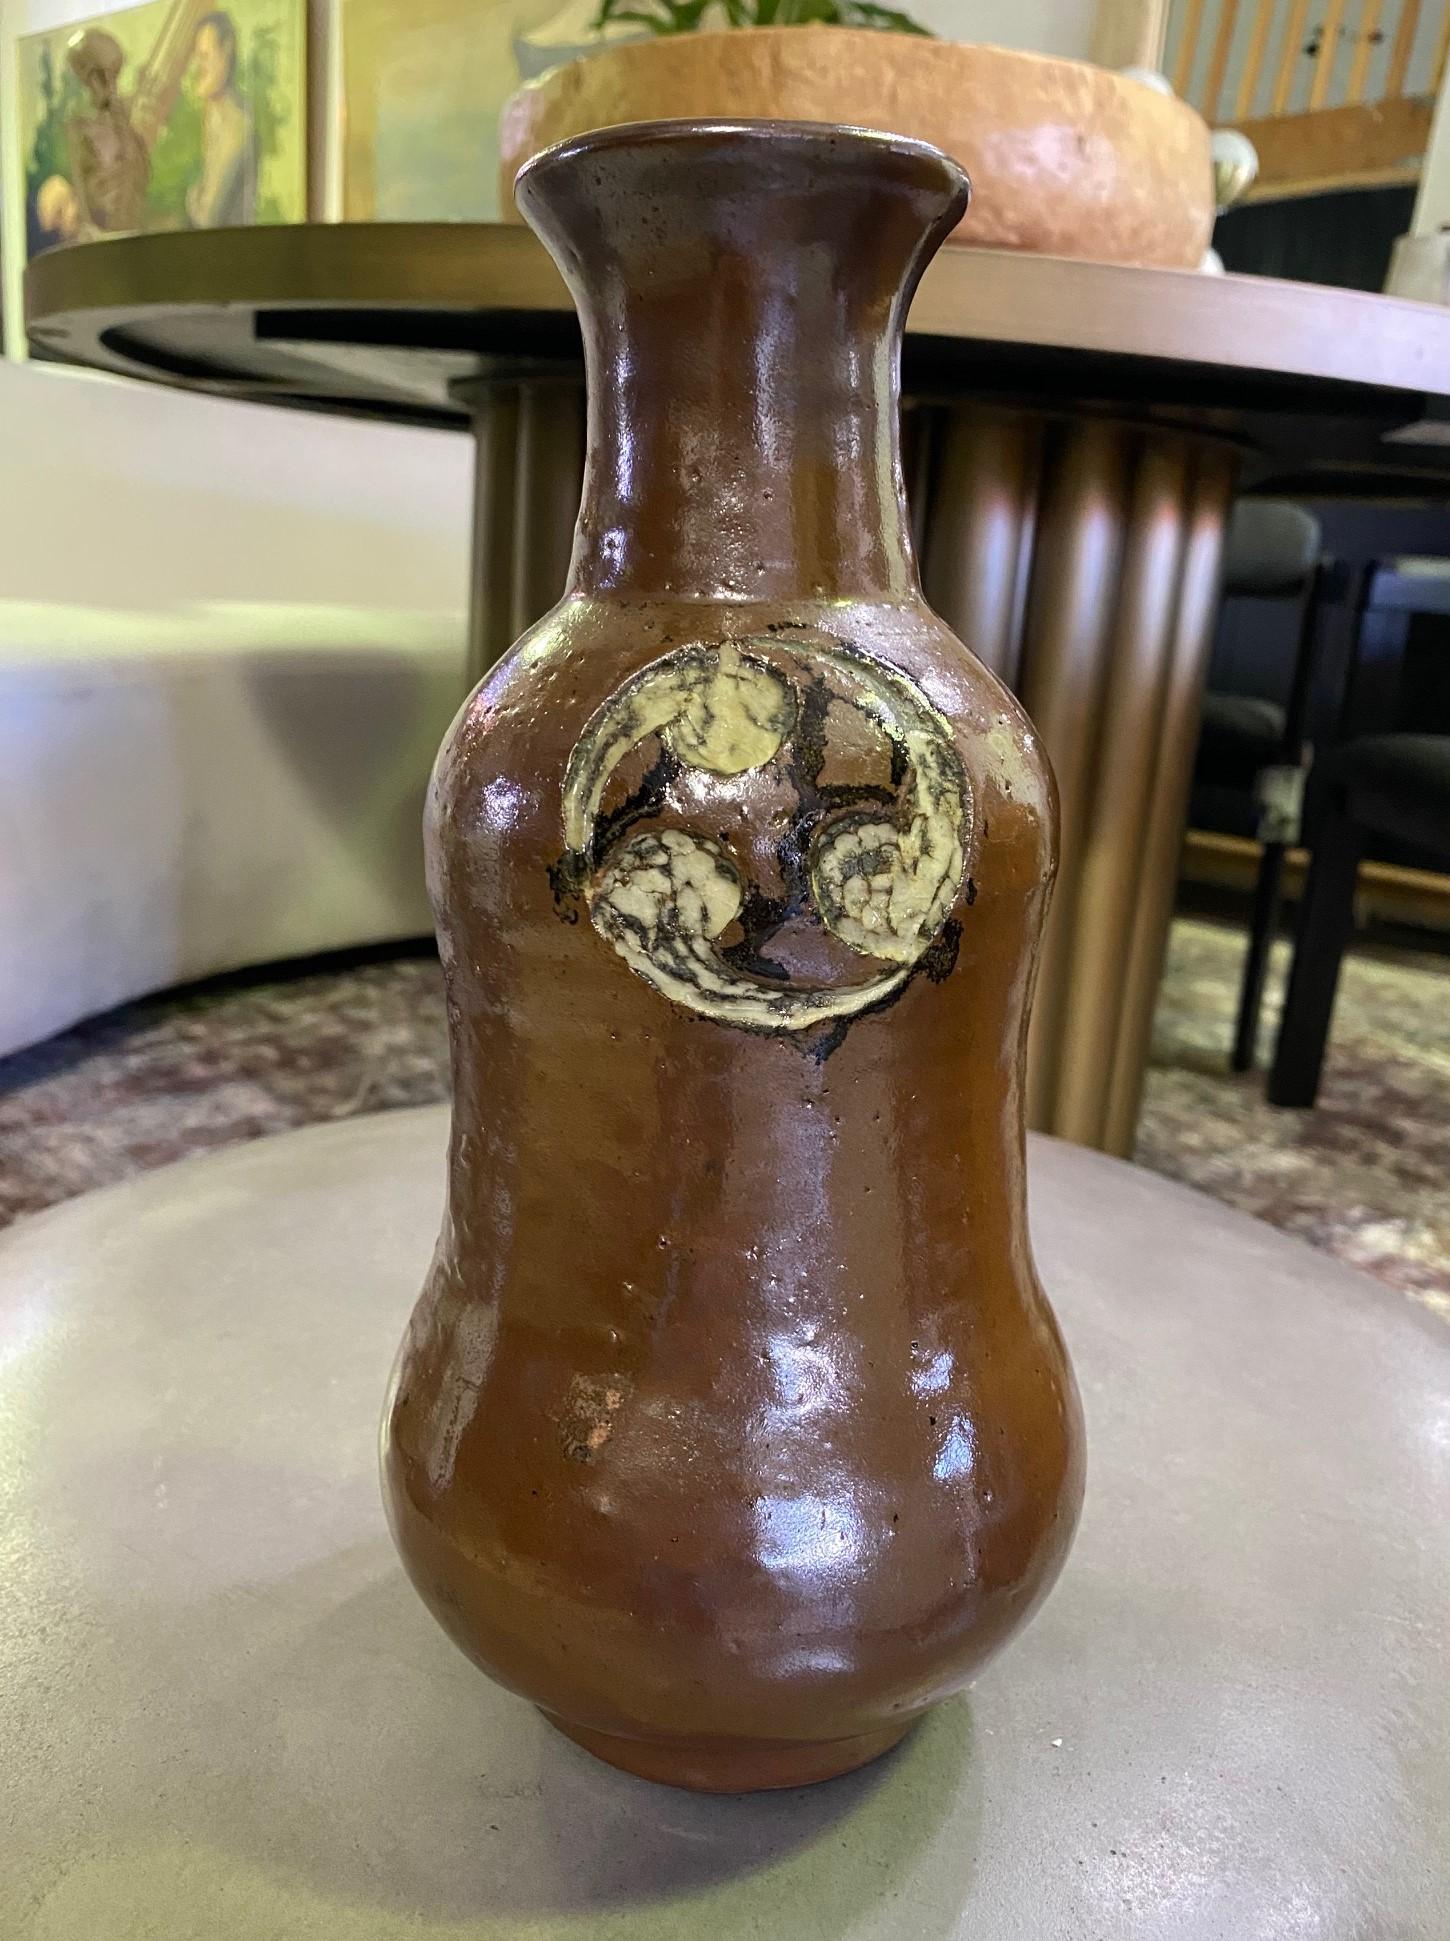 An exquisite, beautifully crafted, and designed gourd vase by master Japanese potter Shoji Hamada, which features a fine example of his famed rich Kaki or persimmon glaze. The original Hamada stamped/sealed and signed box is included. Rare to find